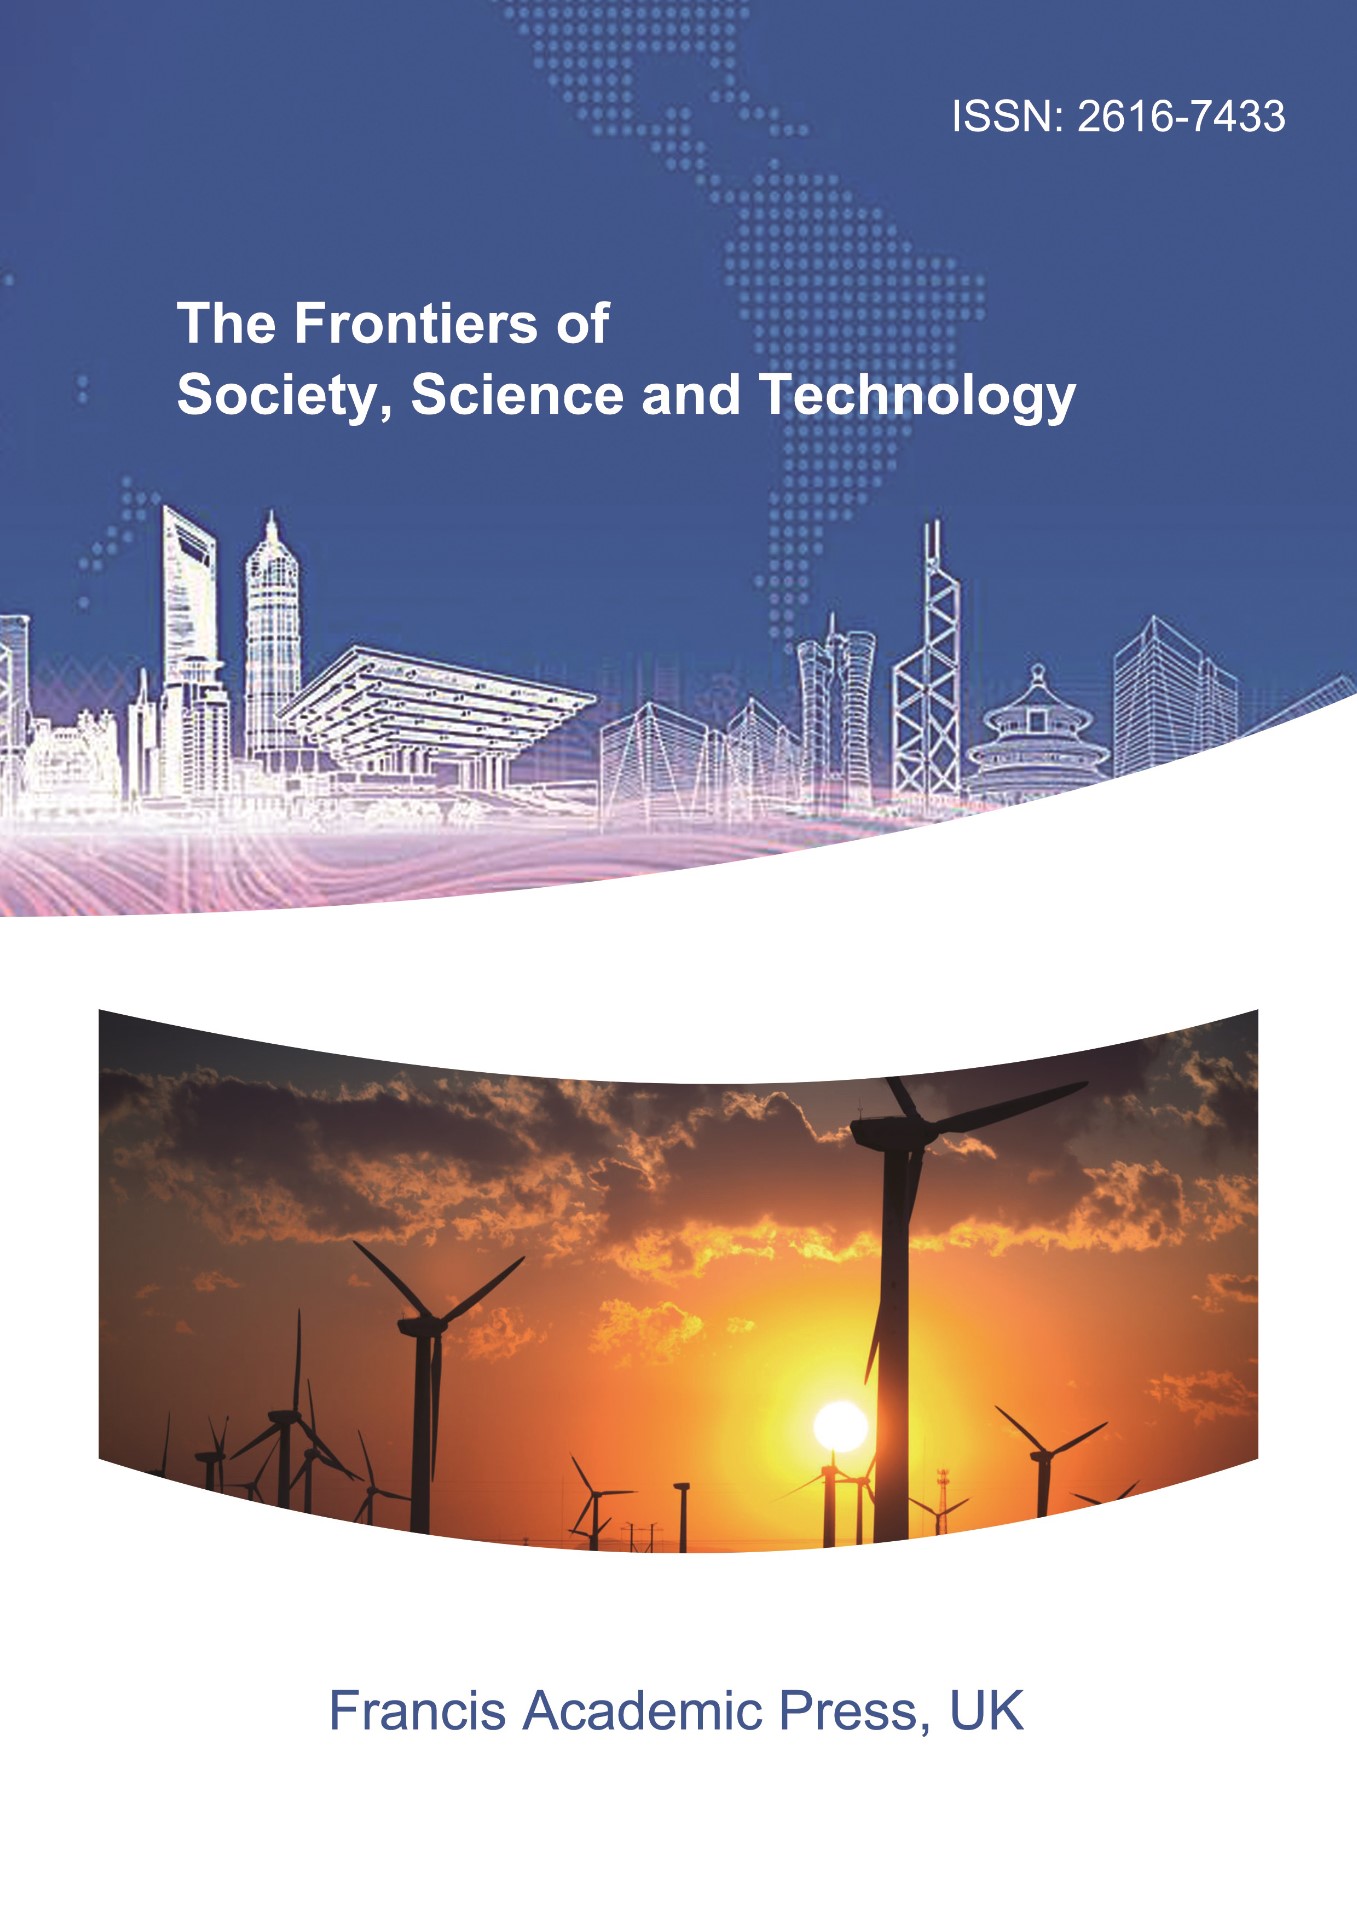 The Frontiers of Society, Science and Technology